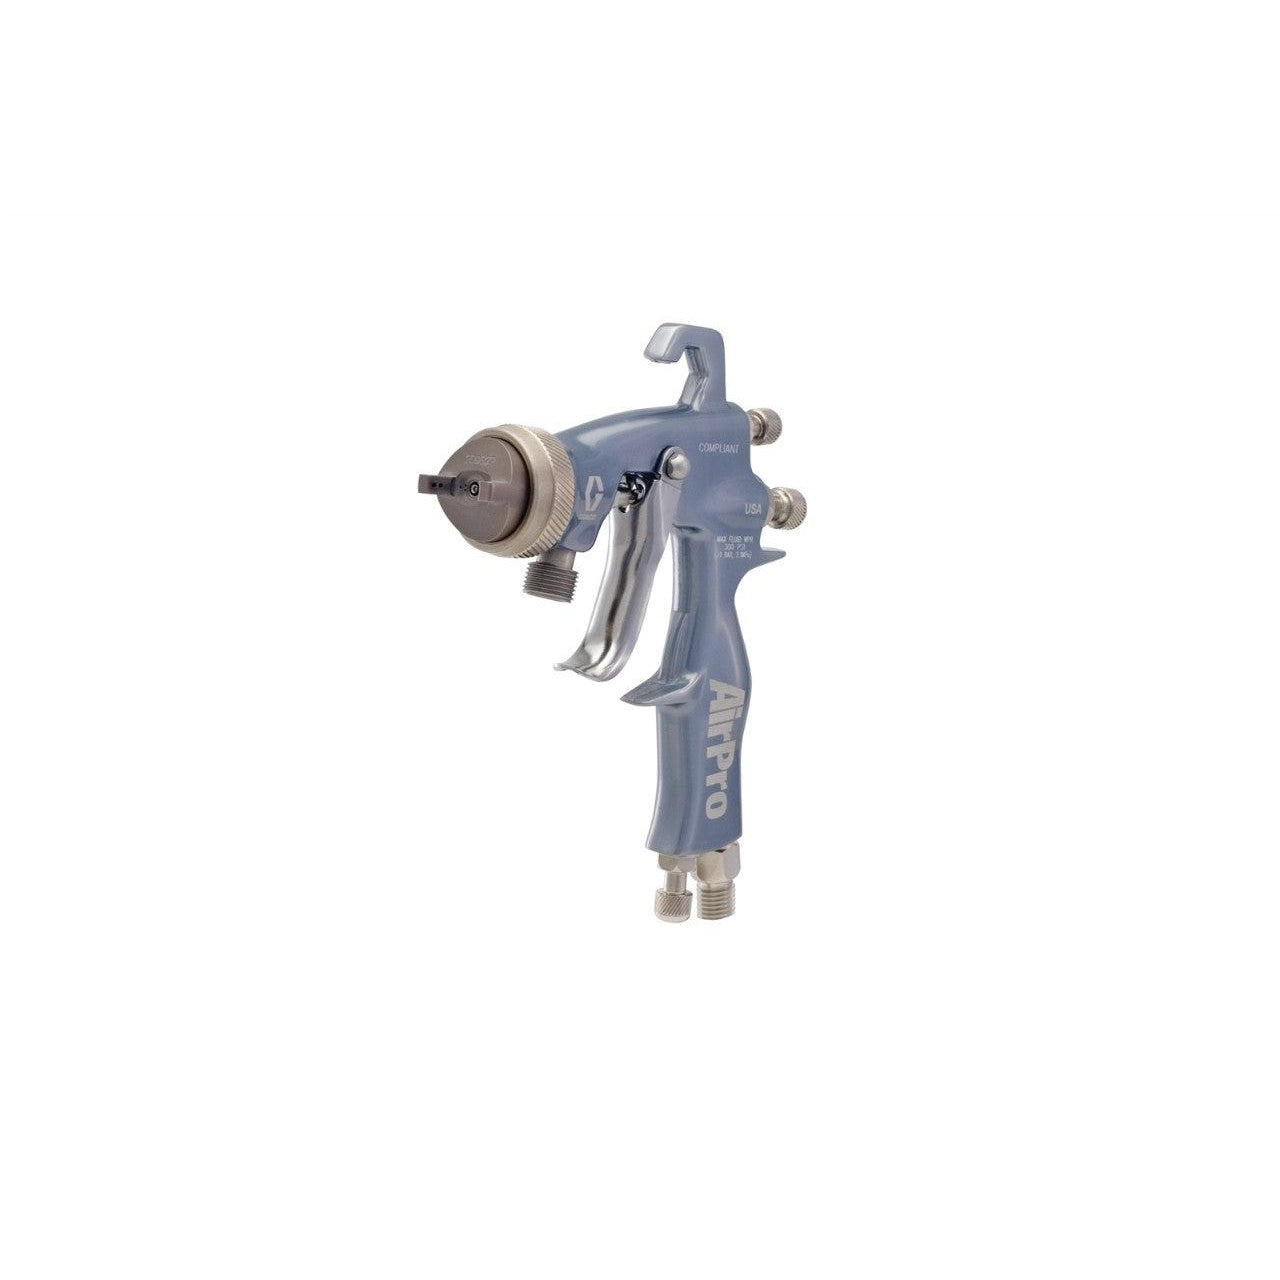 AirPro Air Spray Pressure Feed Gun, Compliant, 0.055 inch (1.4 mm) Nozzle, for Waterborne Applications